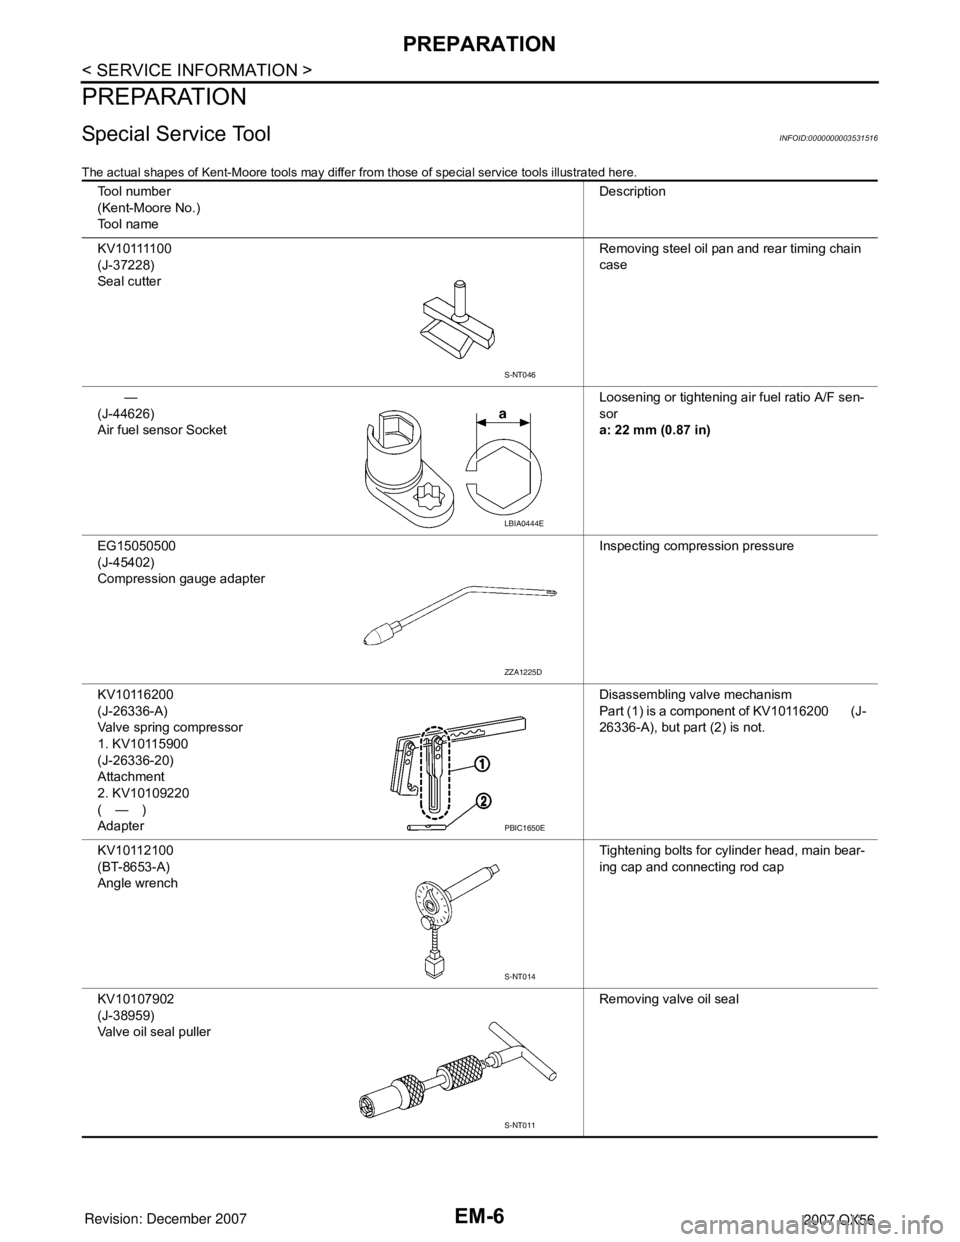 INFINITI QX56 2007  Factory Service Manual 
EM-6
< SERVICE INFORMATION >
PREPARATION
PREPARATION
Special Service ToolINFOID:0000000003531516
The actual shapes of Kent-Moore tools may differ from those of special service tools illustrated here.